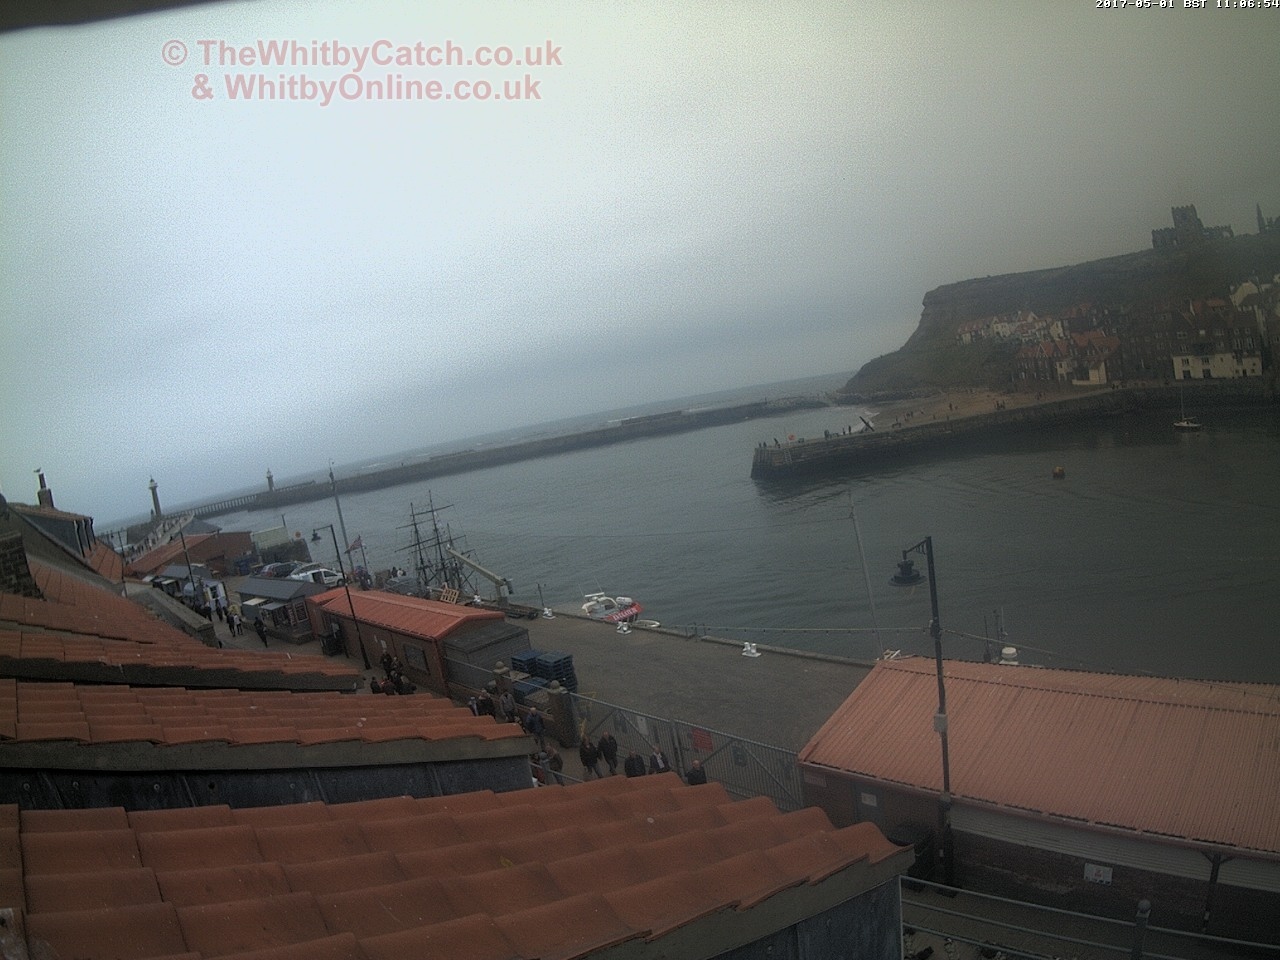 Whitby Mon 1st May 2017 11:07.